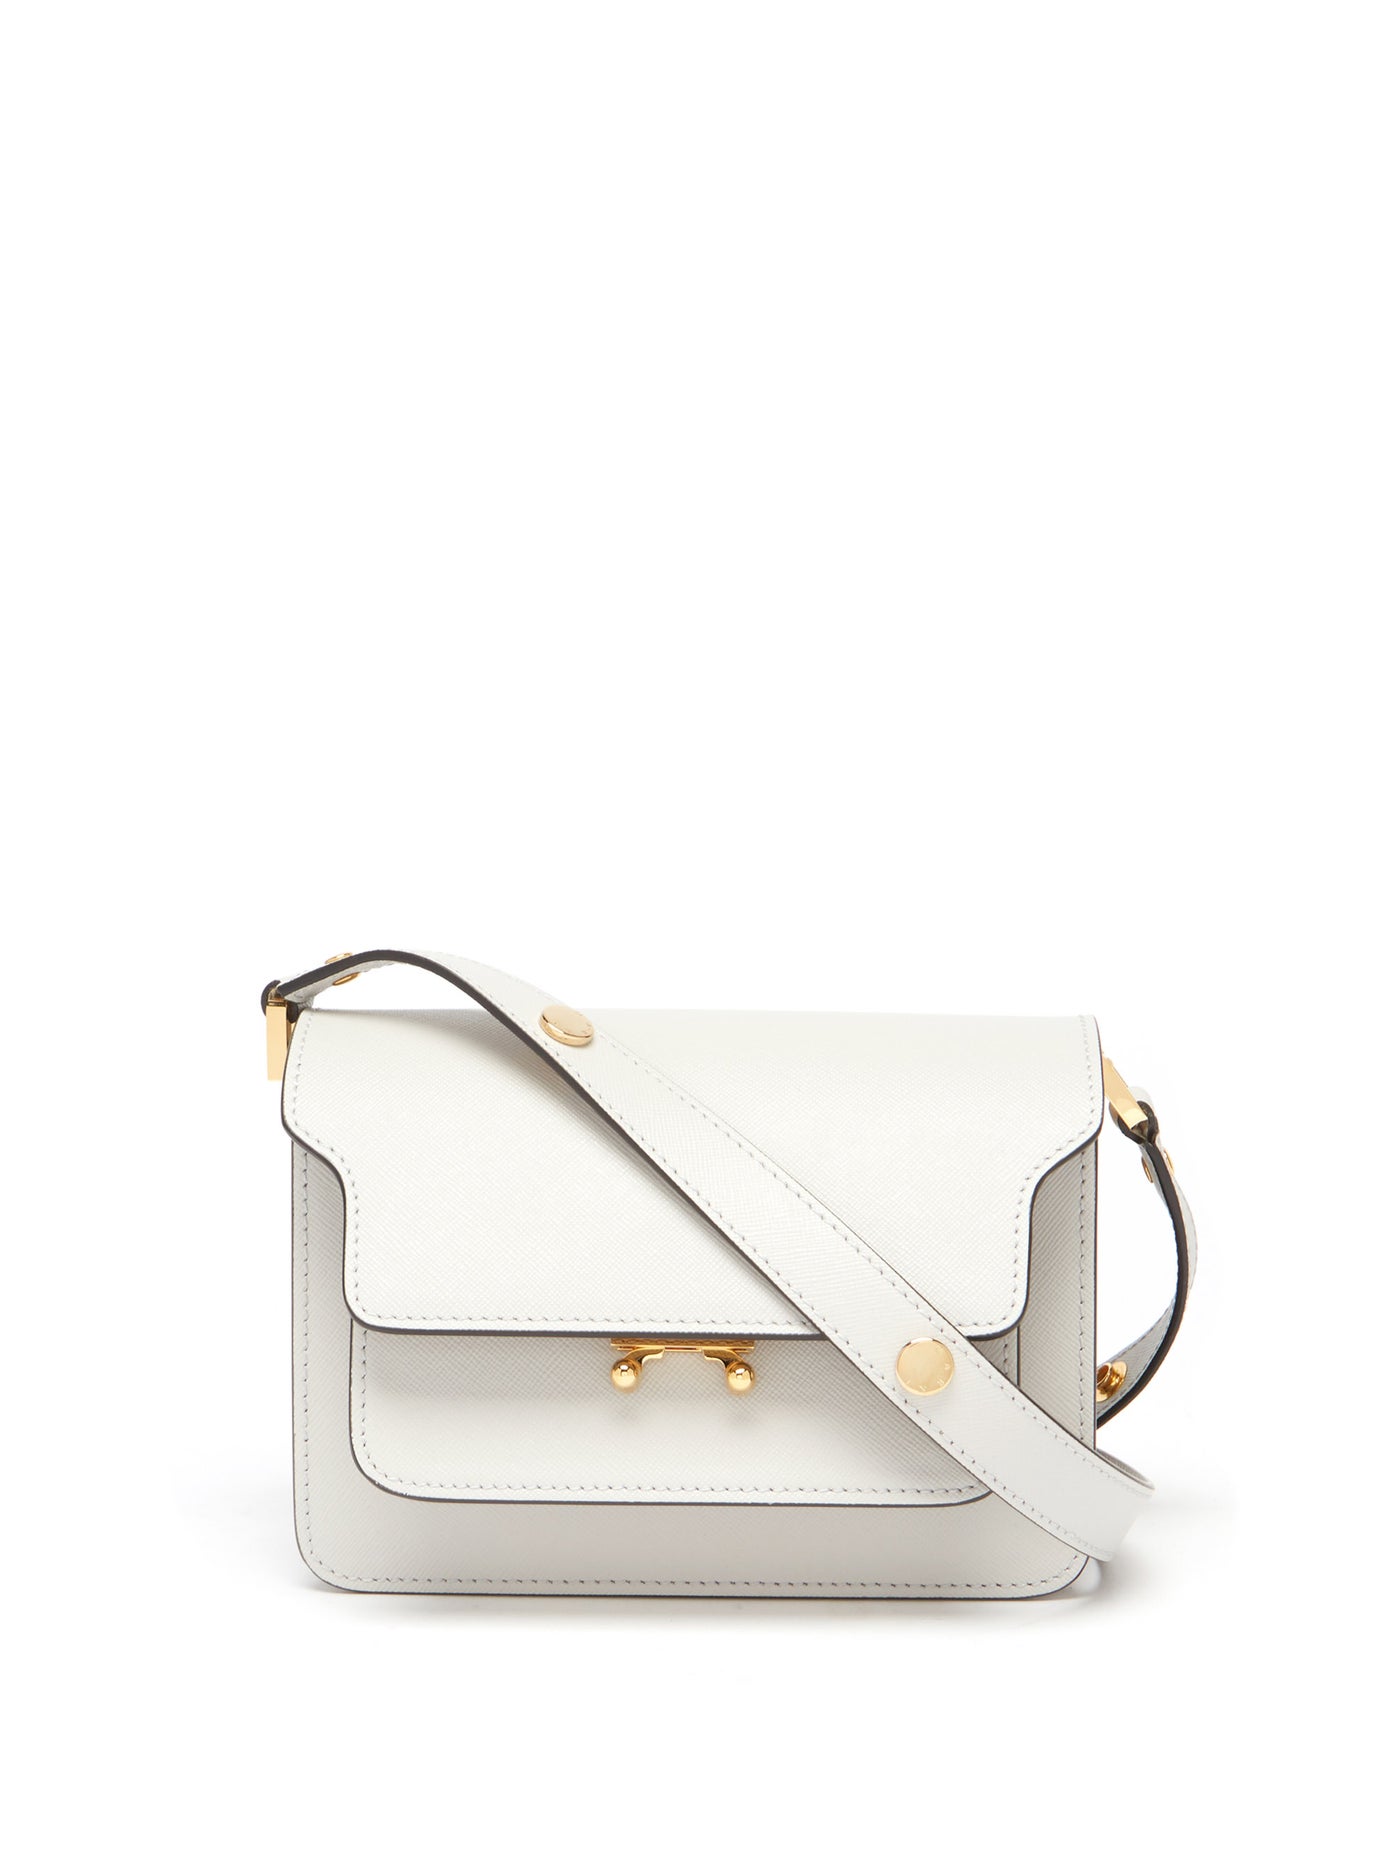 Marni - Trunk Mini Leather Cross-Body Bag | ABOUT ICONS